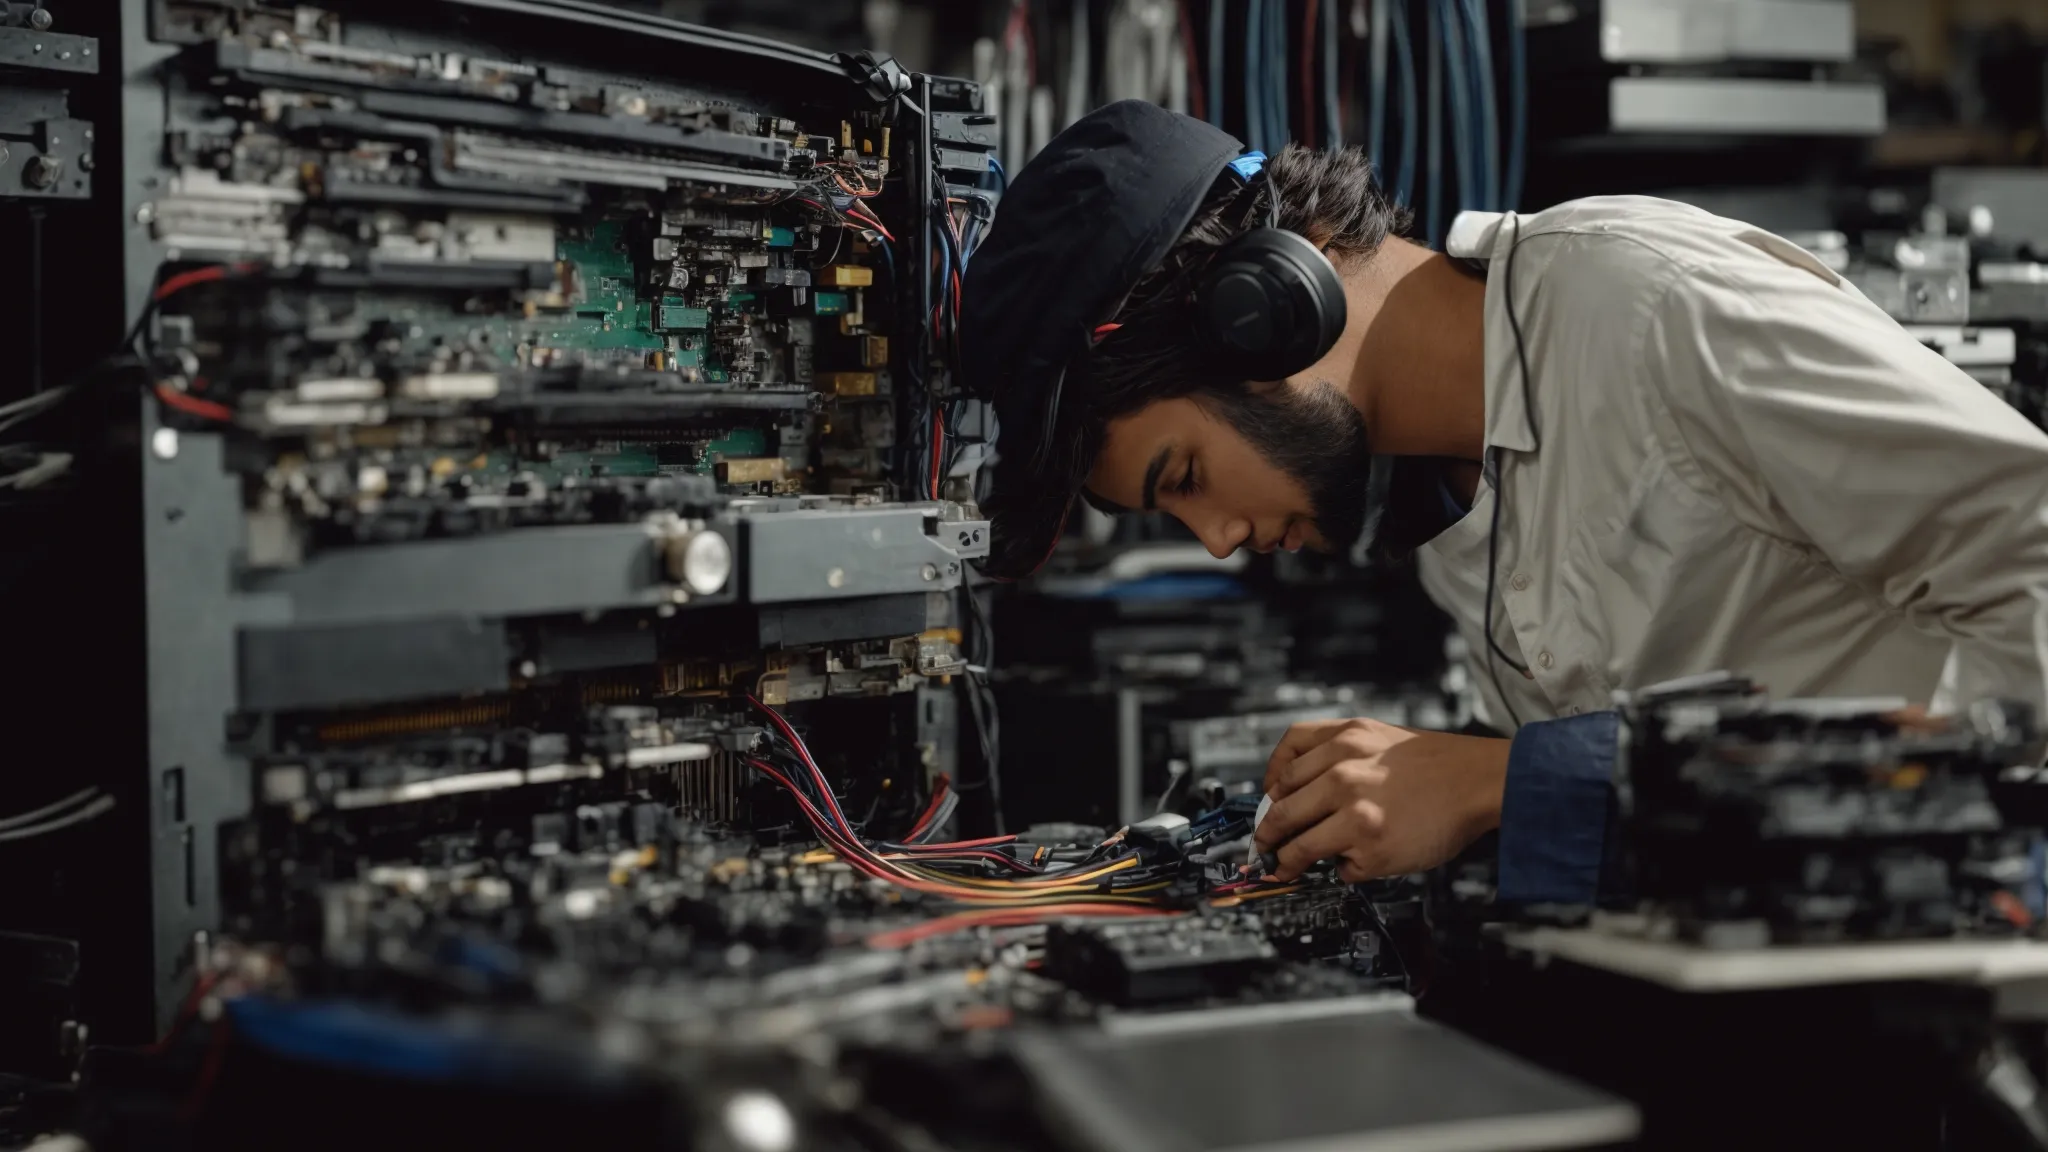 a computer technician skillfully repairs a desktop pc in a well-organized, tool-filled repair shop.